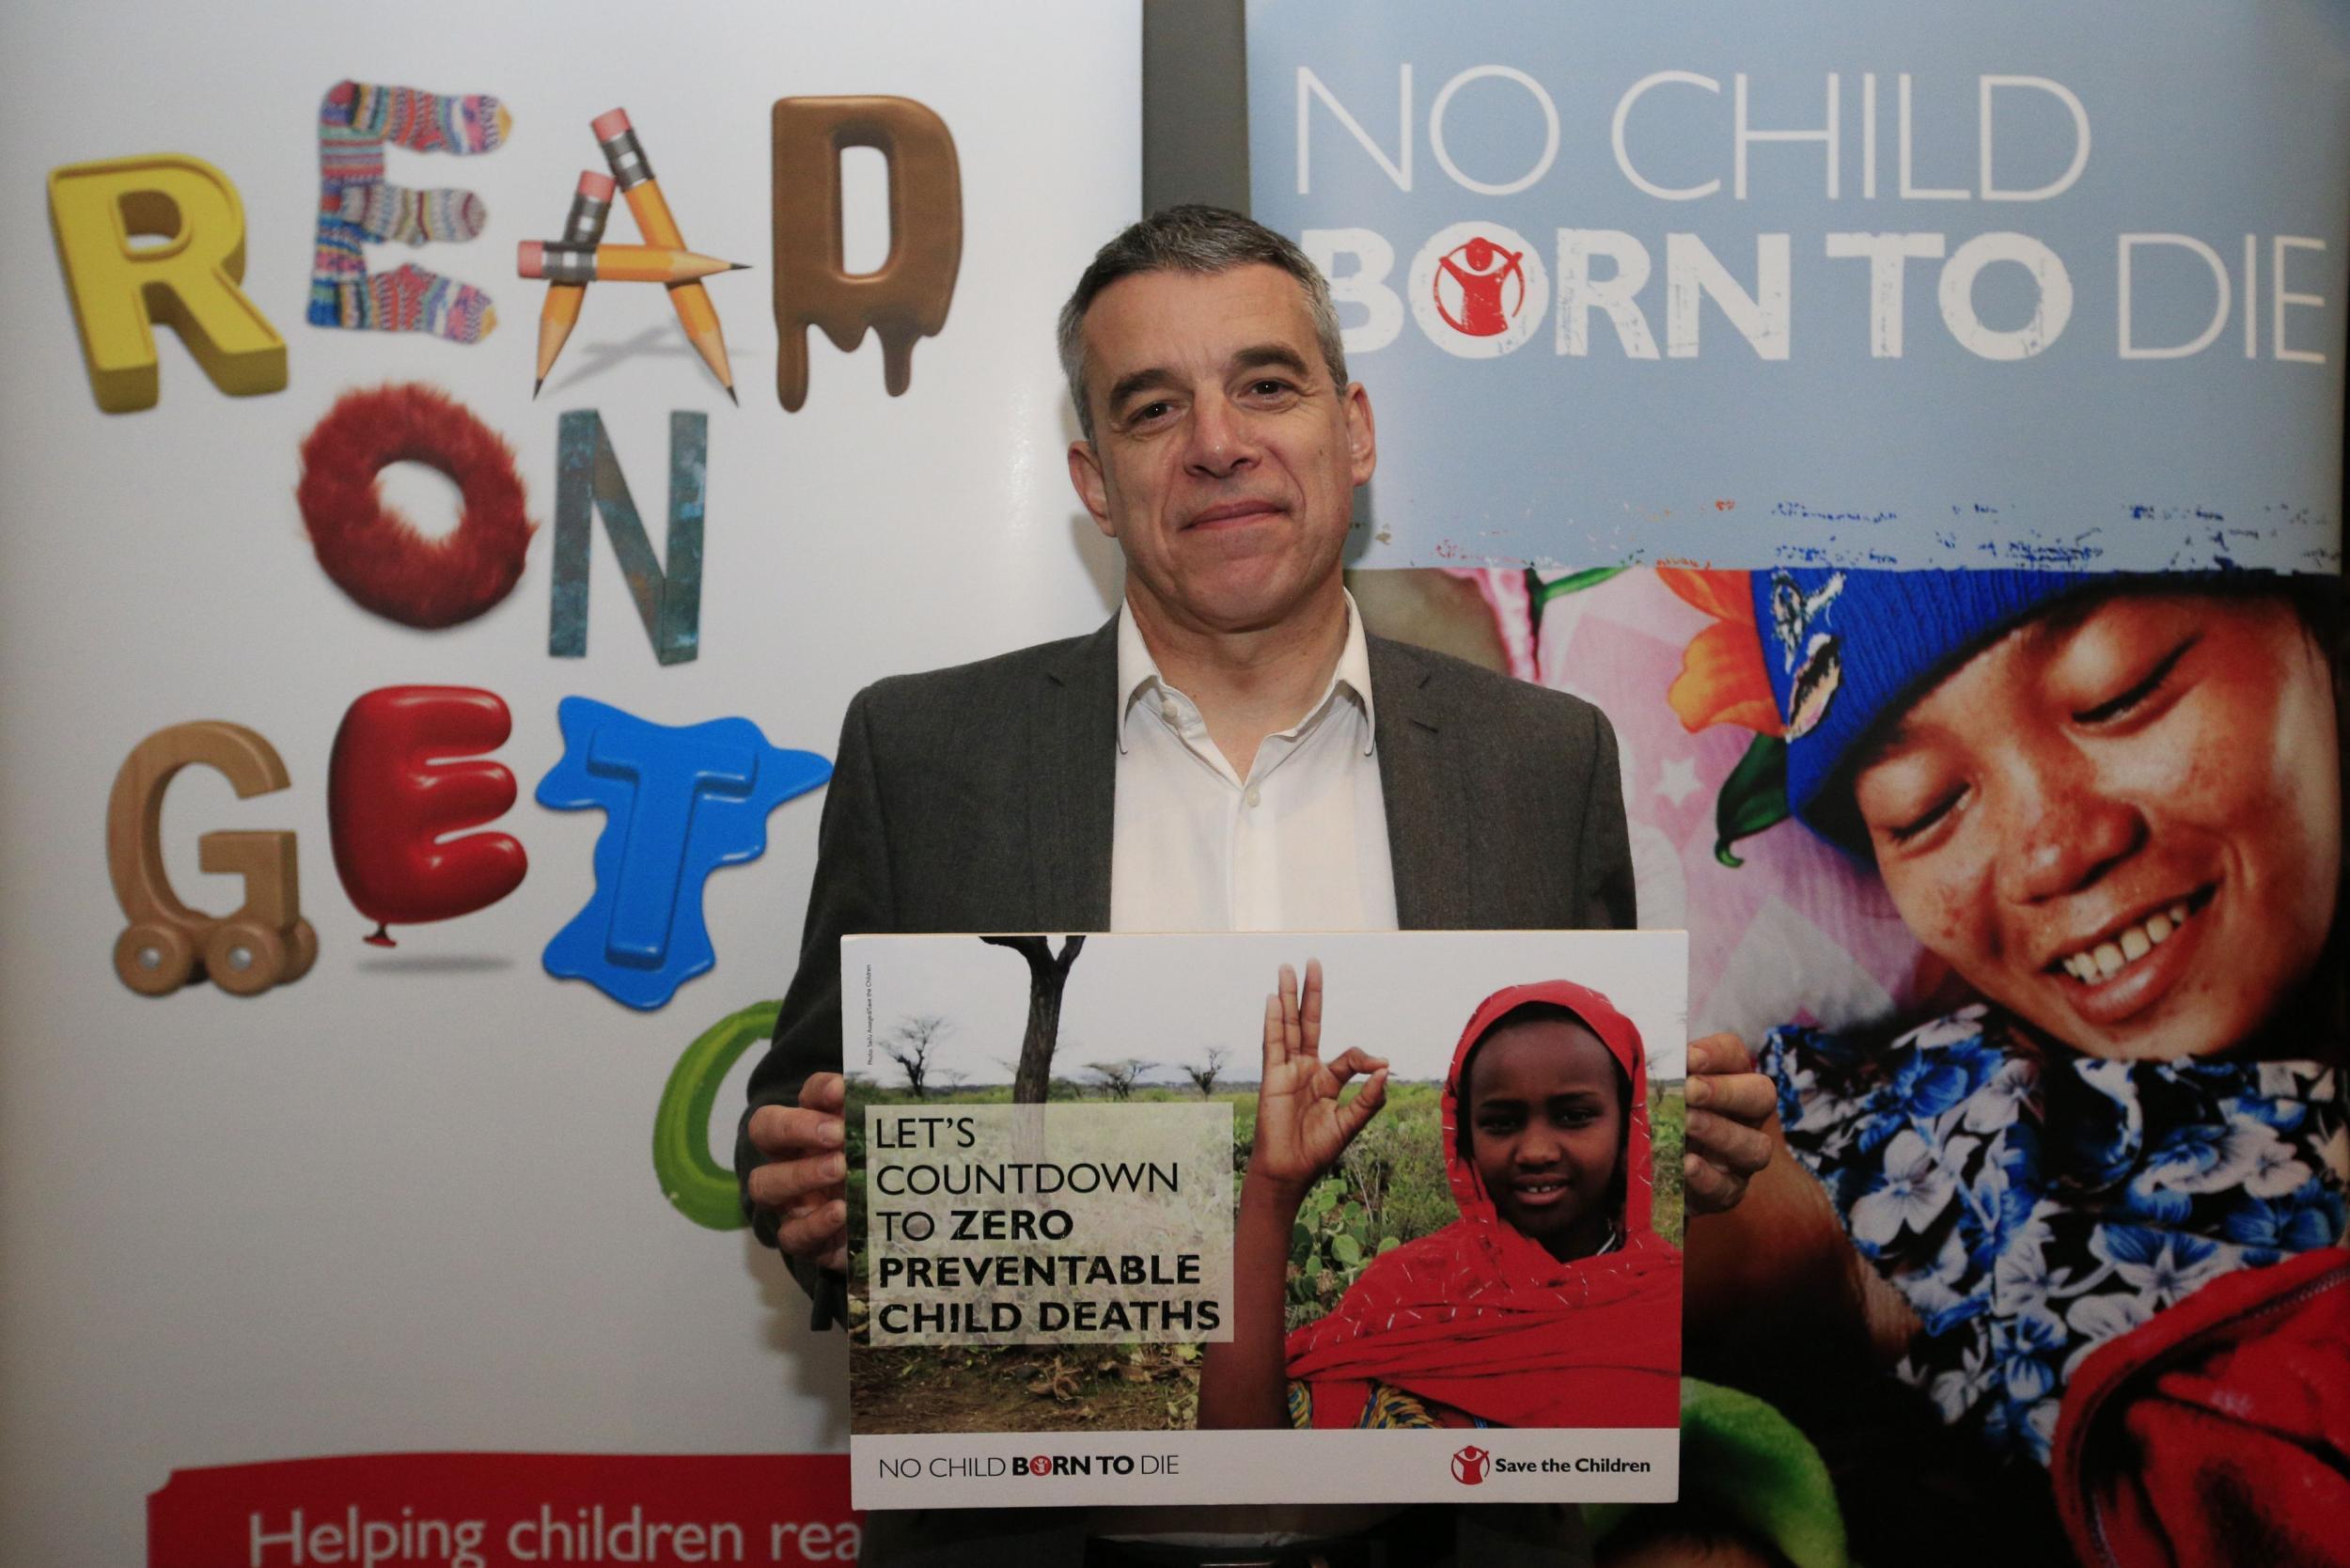 Jeff Smith holds up a message board at a Save the Children event in 2015. Jonathan Brady/PA Images